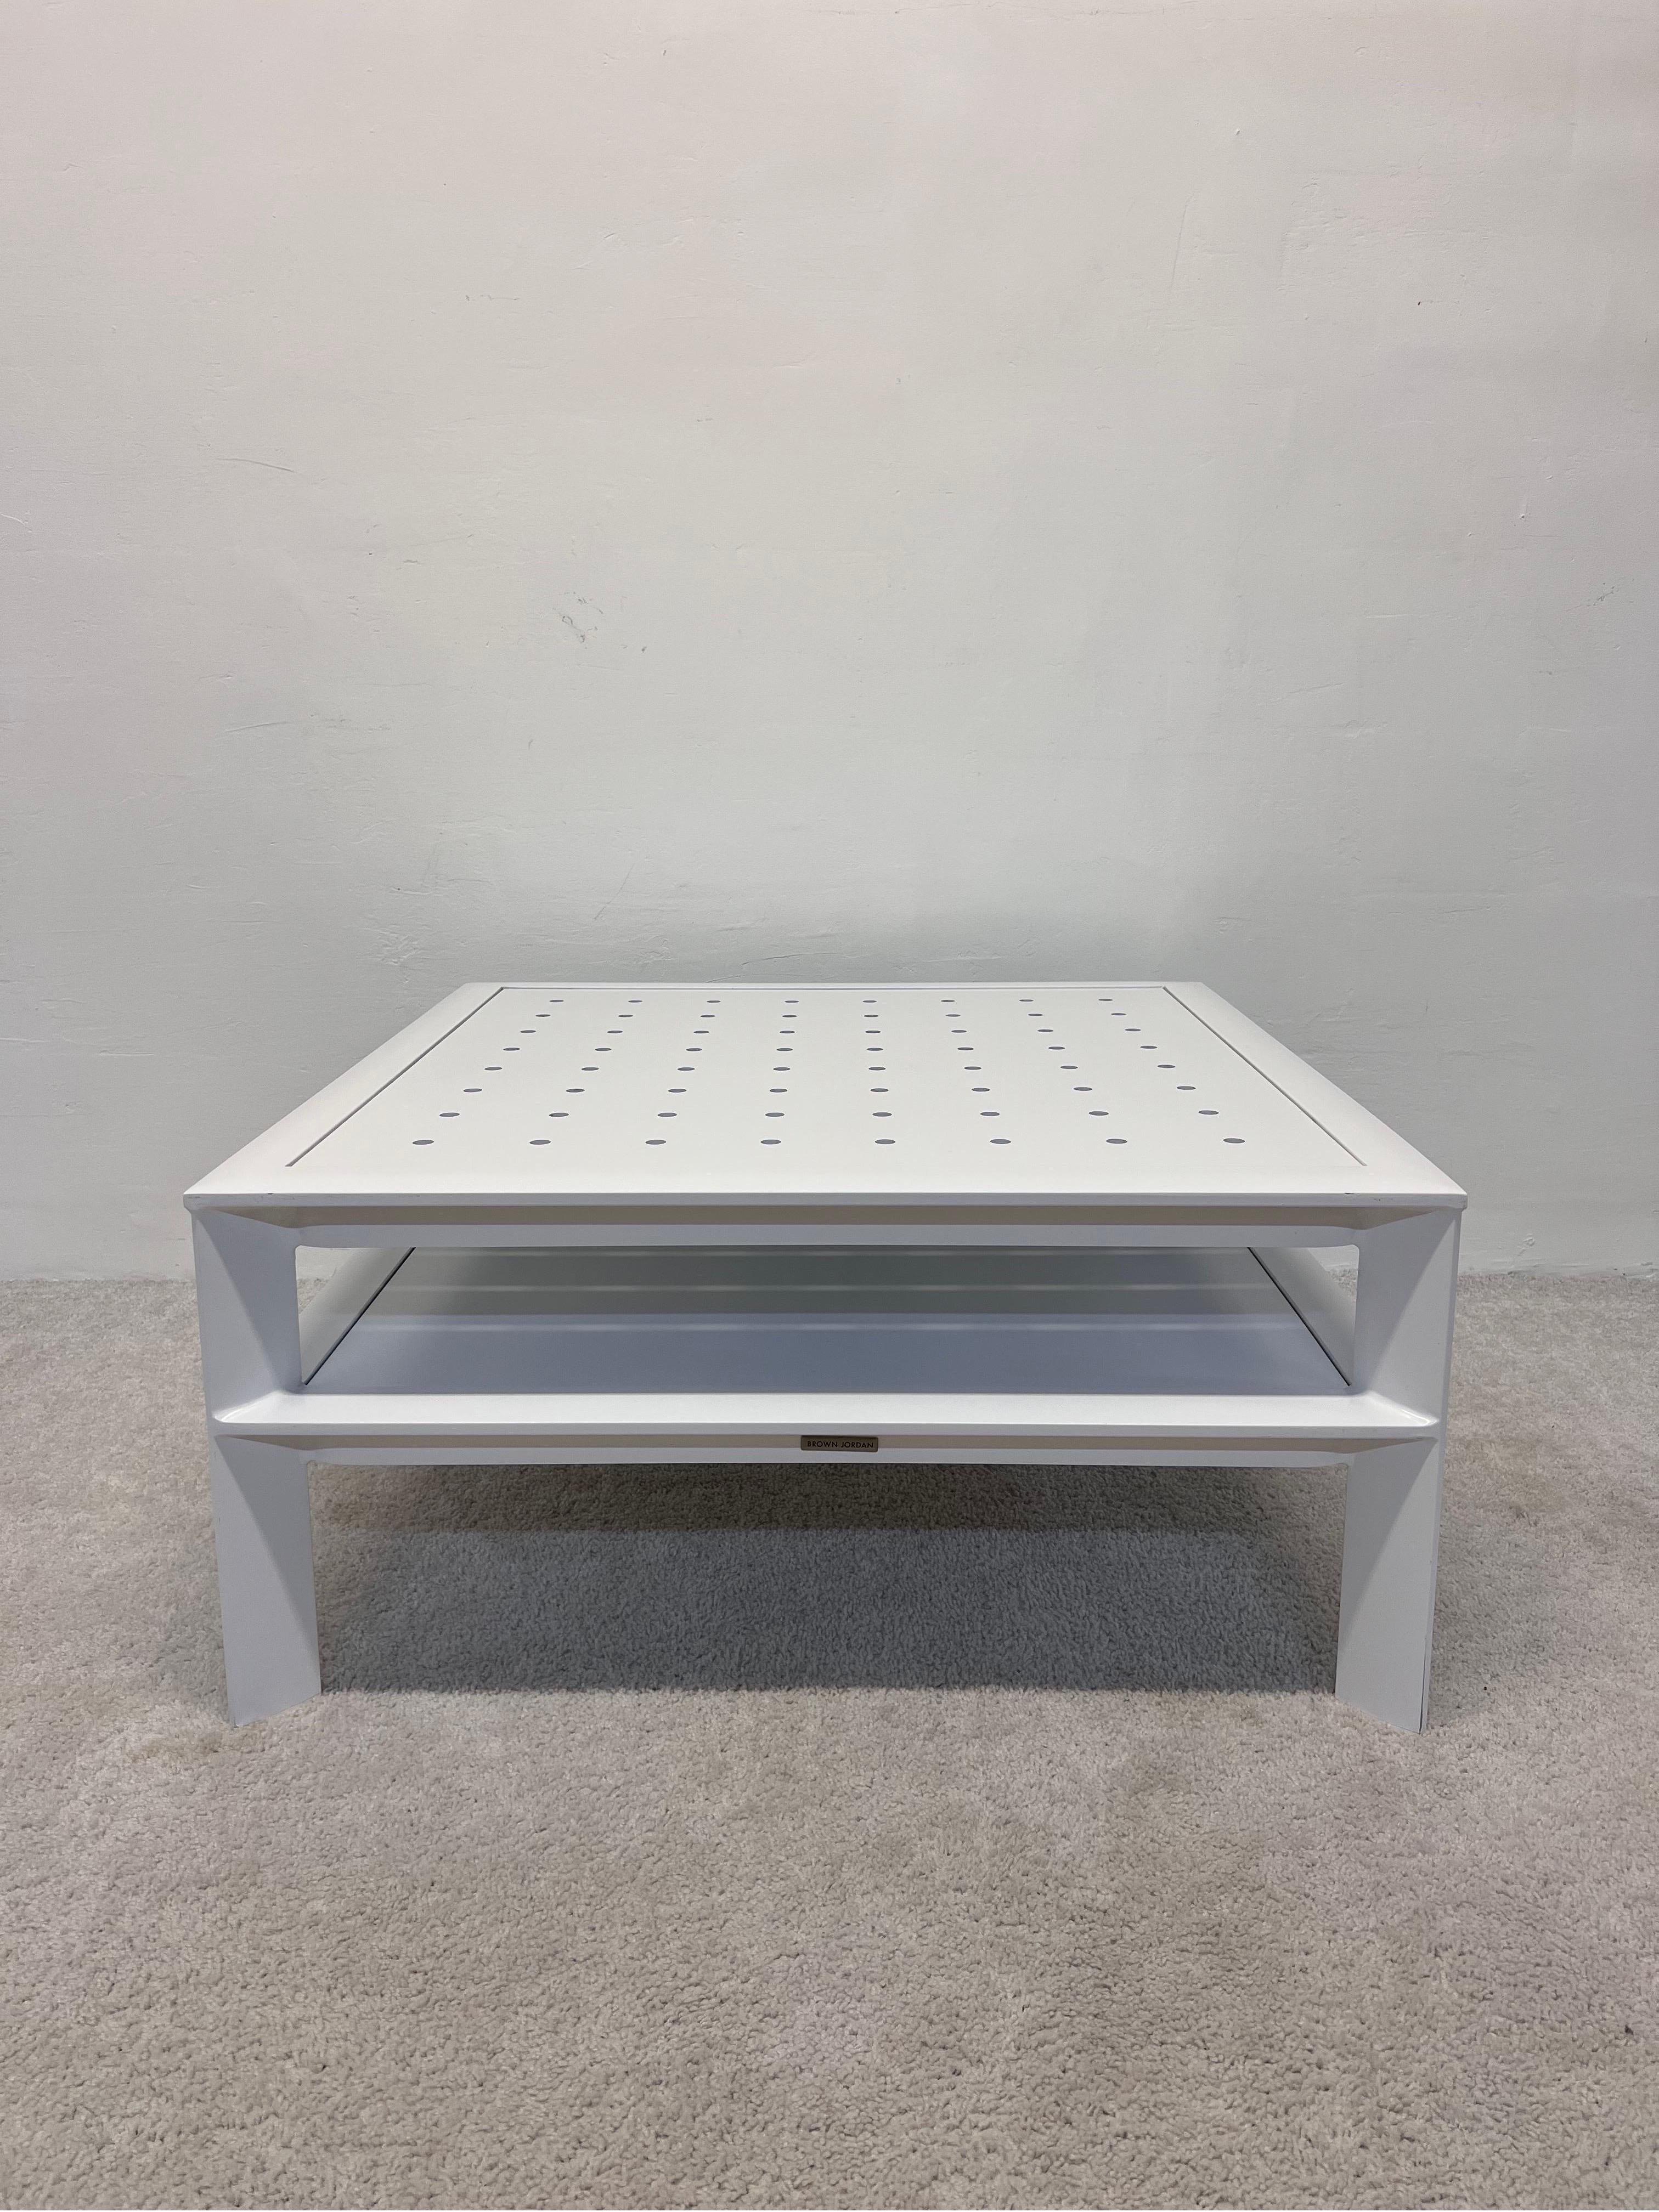 White powder-coated aluminum outdoor coffee or cocktail table with perforated top and lower shelf by John Caldwell for Brown Jordan.

We have two tables available.
Ref. # LU5392230980922.